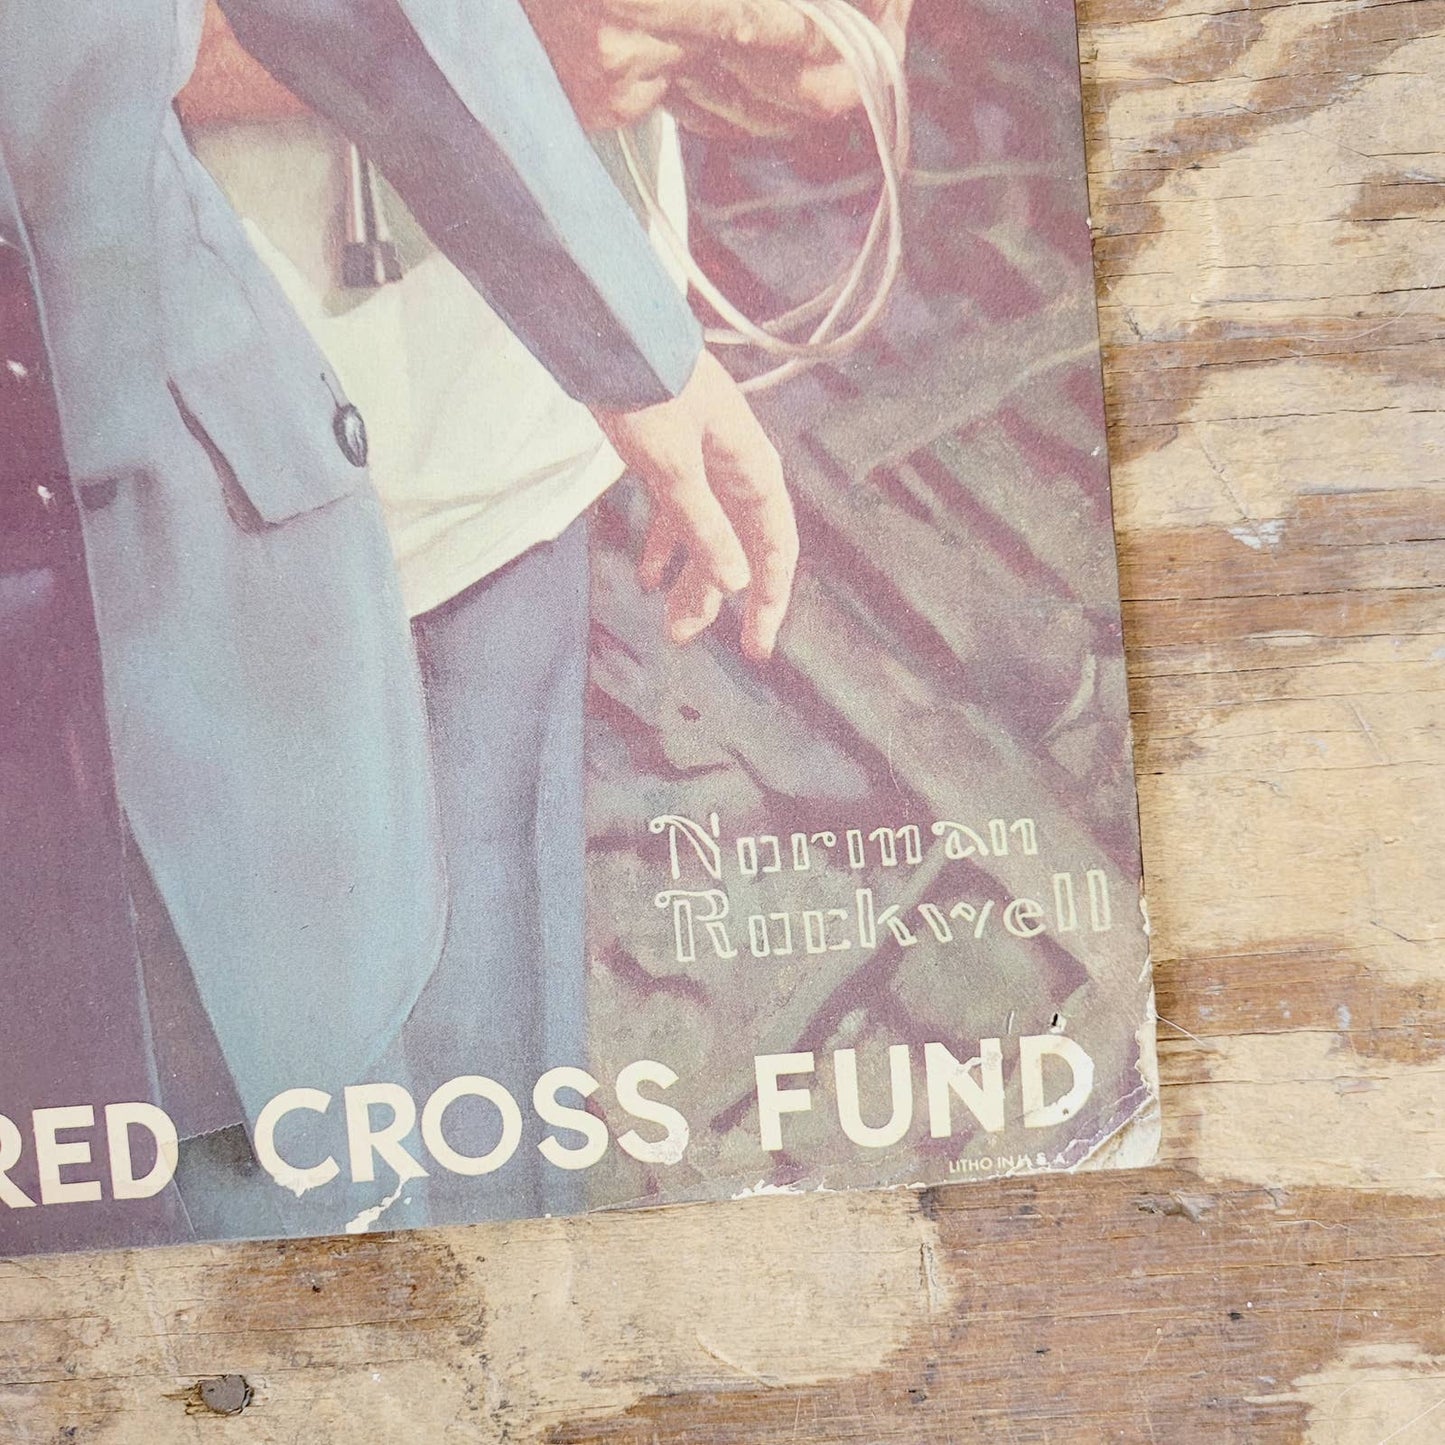 1951 WWII Mobilize for Defense Red Cross War Fund Poster Original